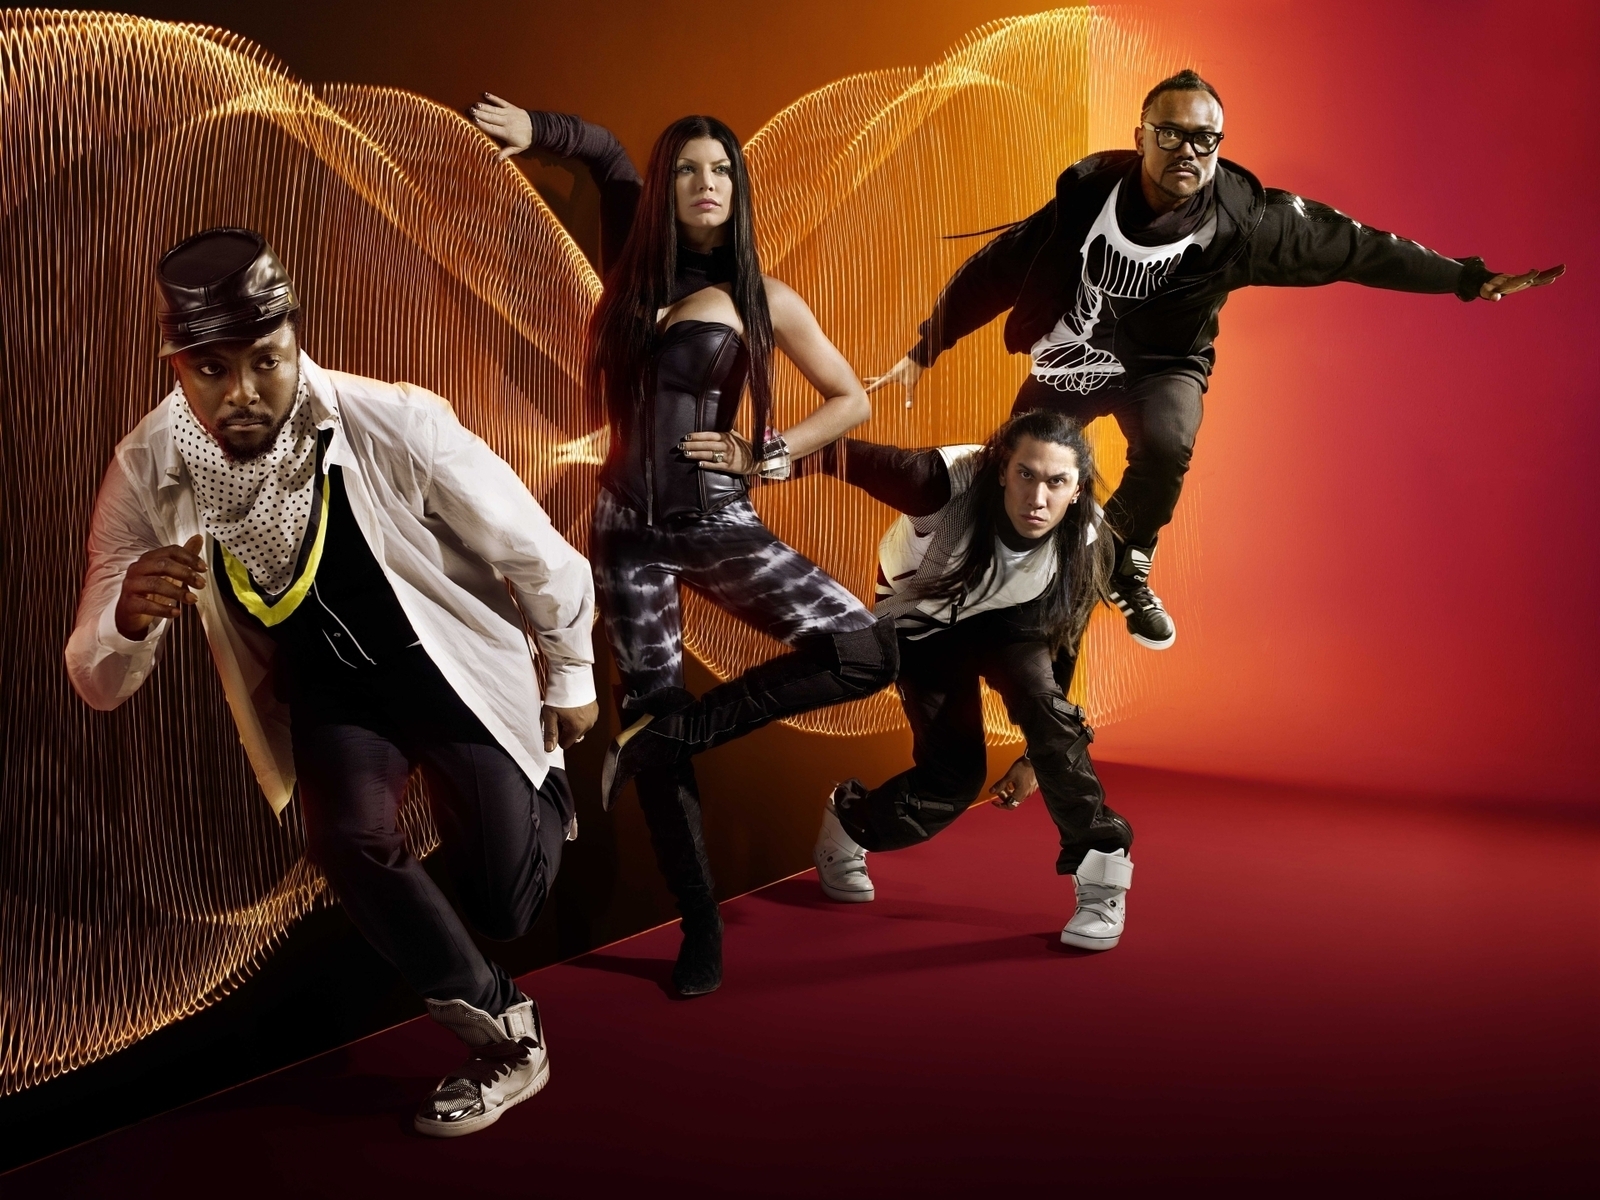 Black Eyed Peas Poster for 1600 x 1200 resolution